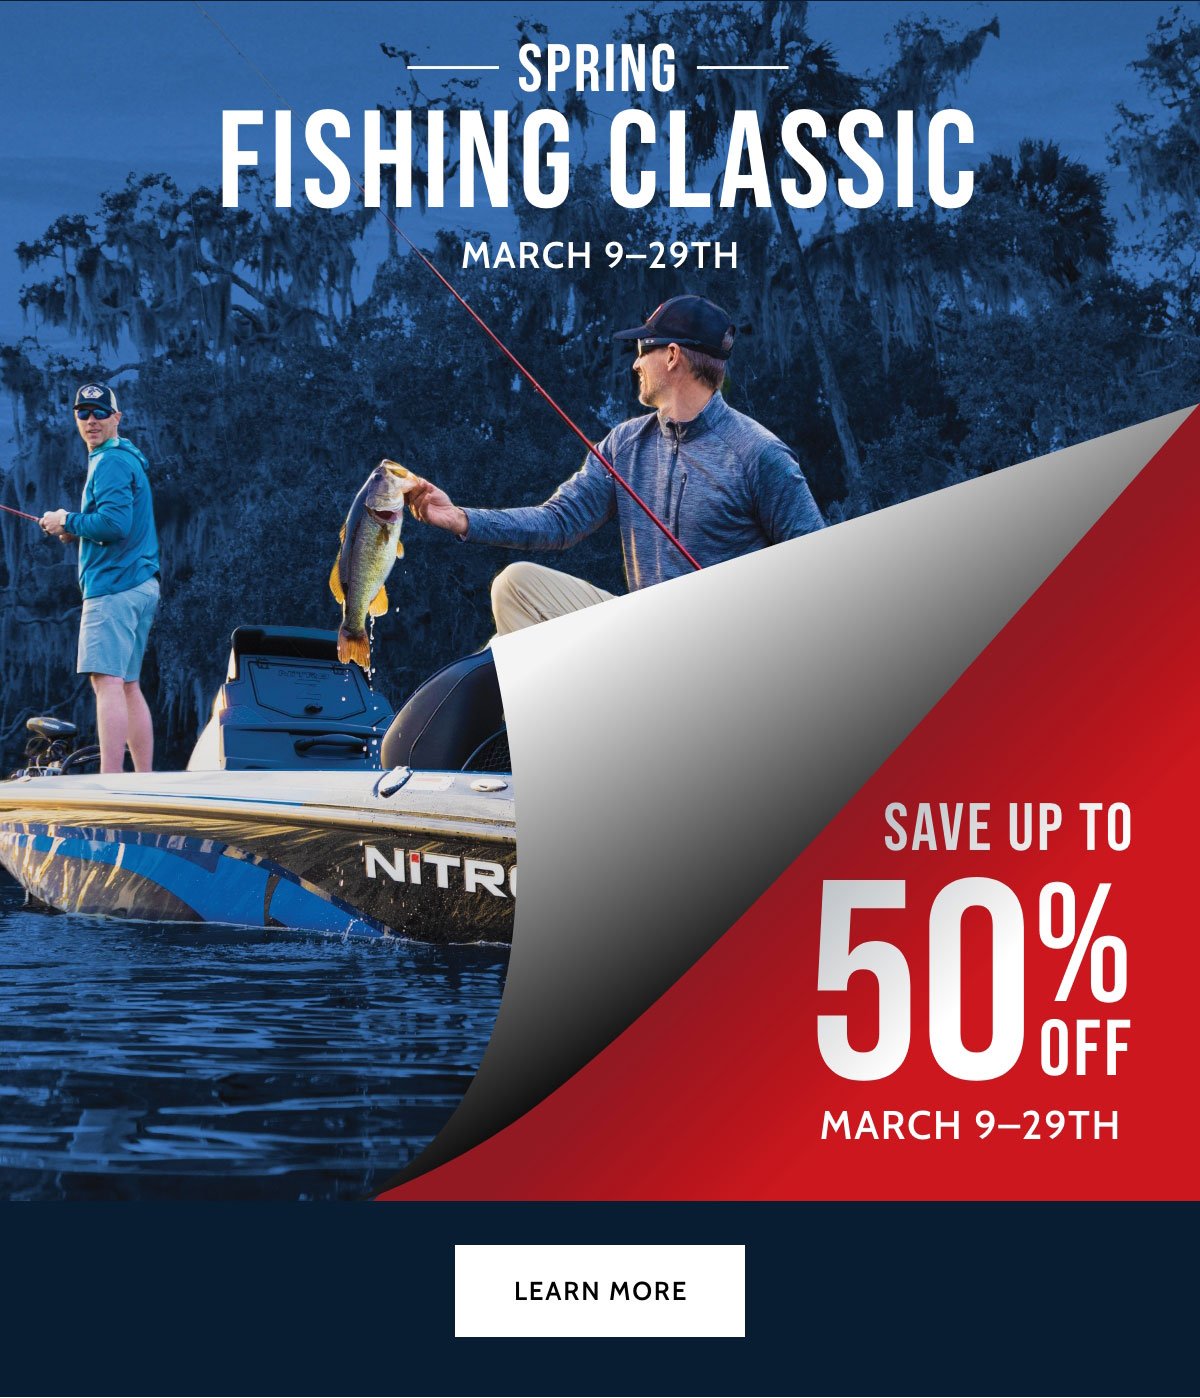 Bass Pro Shops: The Countdown To The Spring Fishing Classic Is On